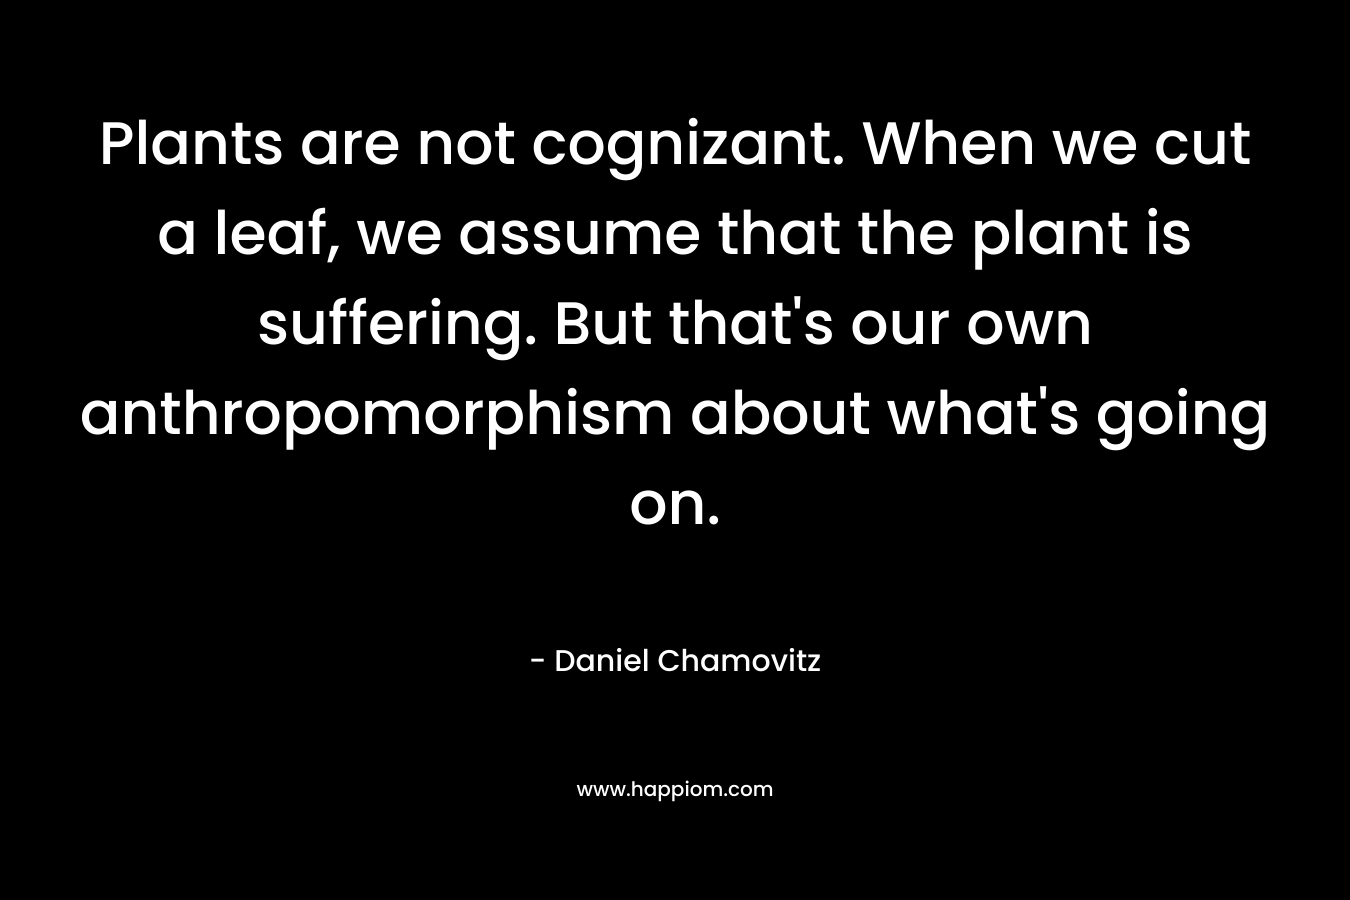 Plants are not cognizant. When we cut a leaf, we assume that the plant is suffering. But that’s our own anthropomorphism about what’s going on. – Daniel Chamovitz